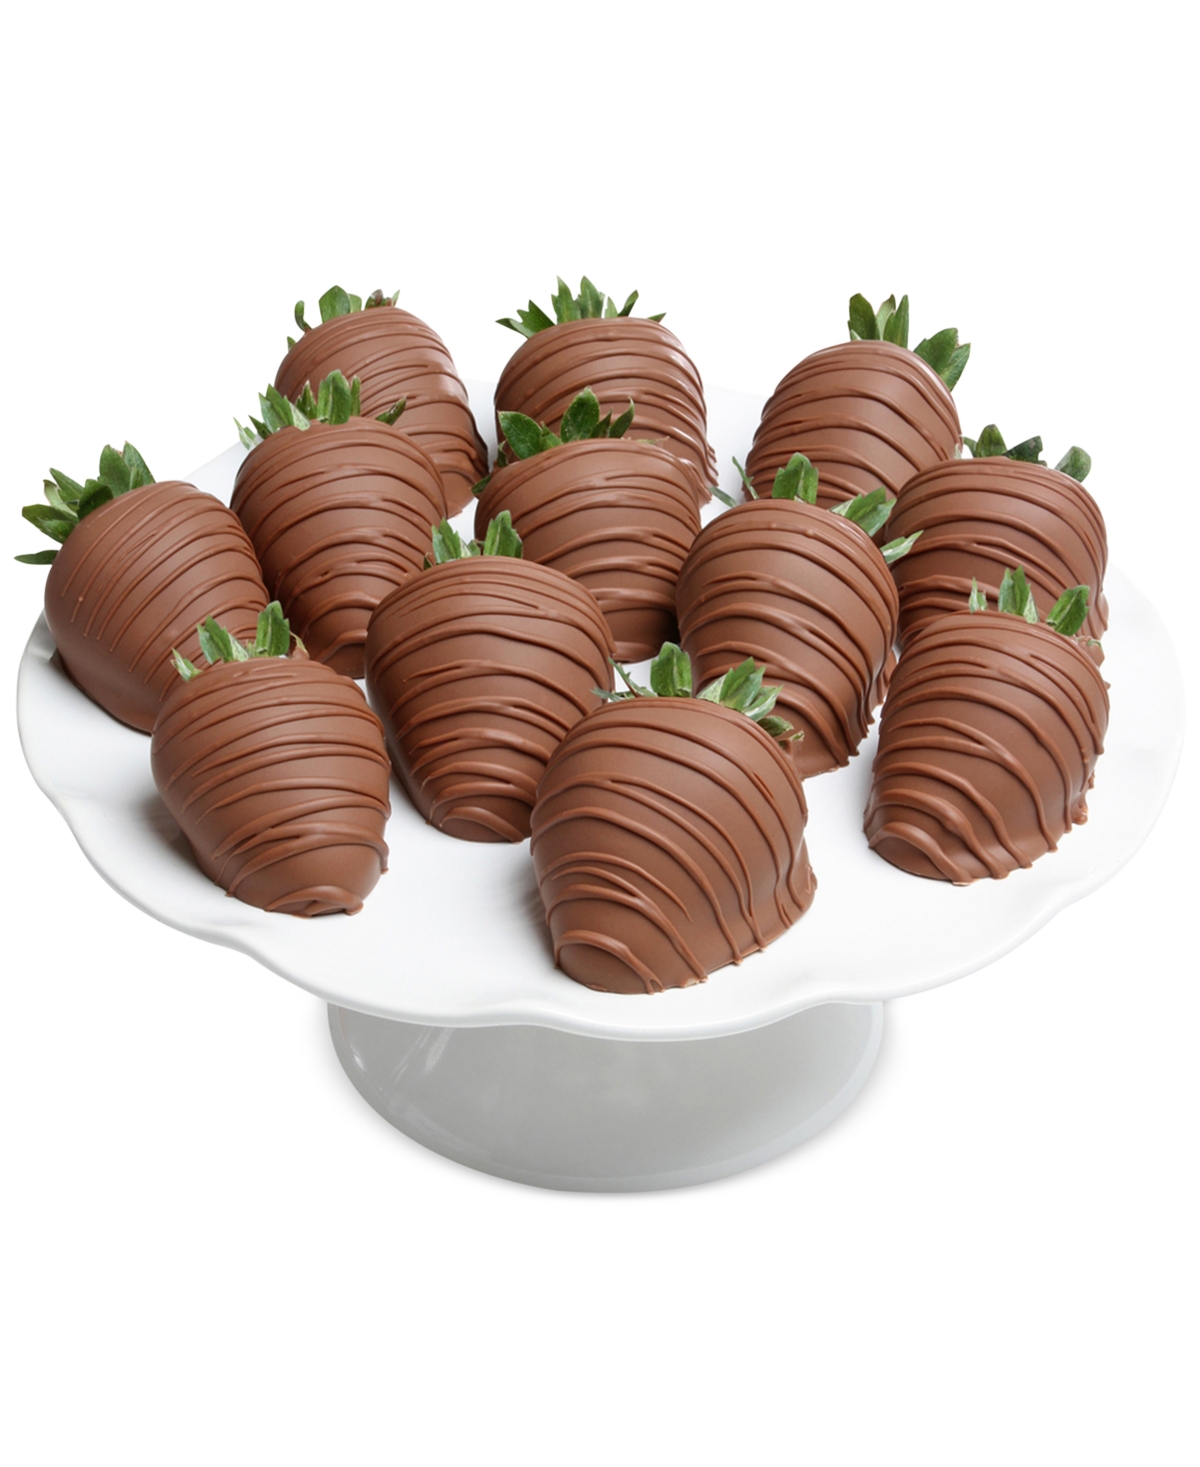 Shop Chocolate Covered Company 12-pc. Milk Chocolate Covered Strawberries In Brown